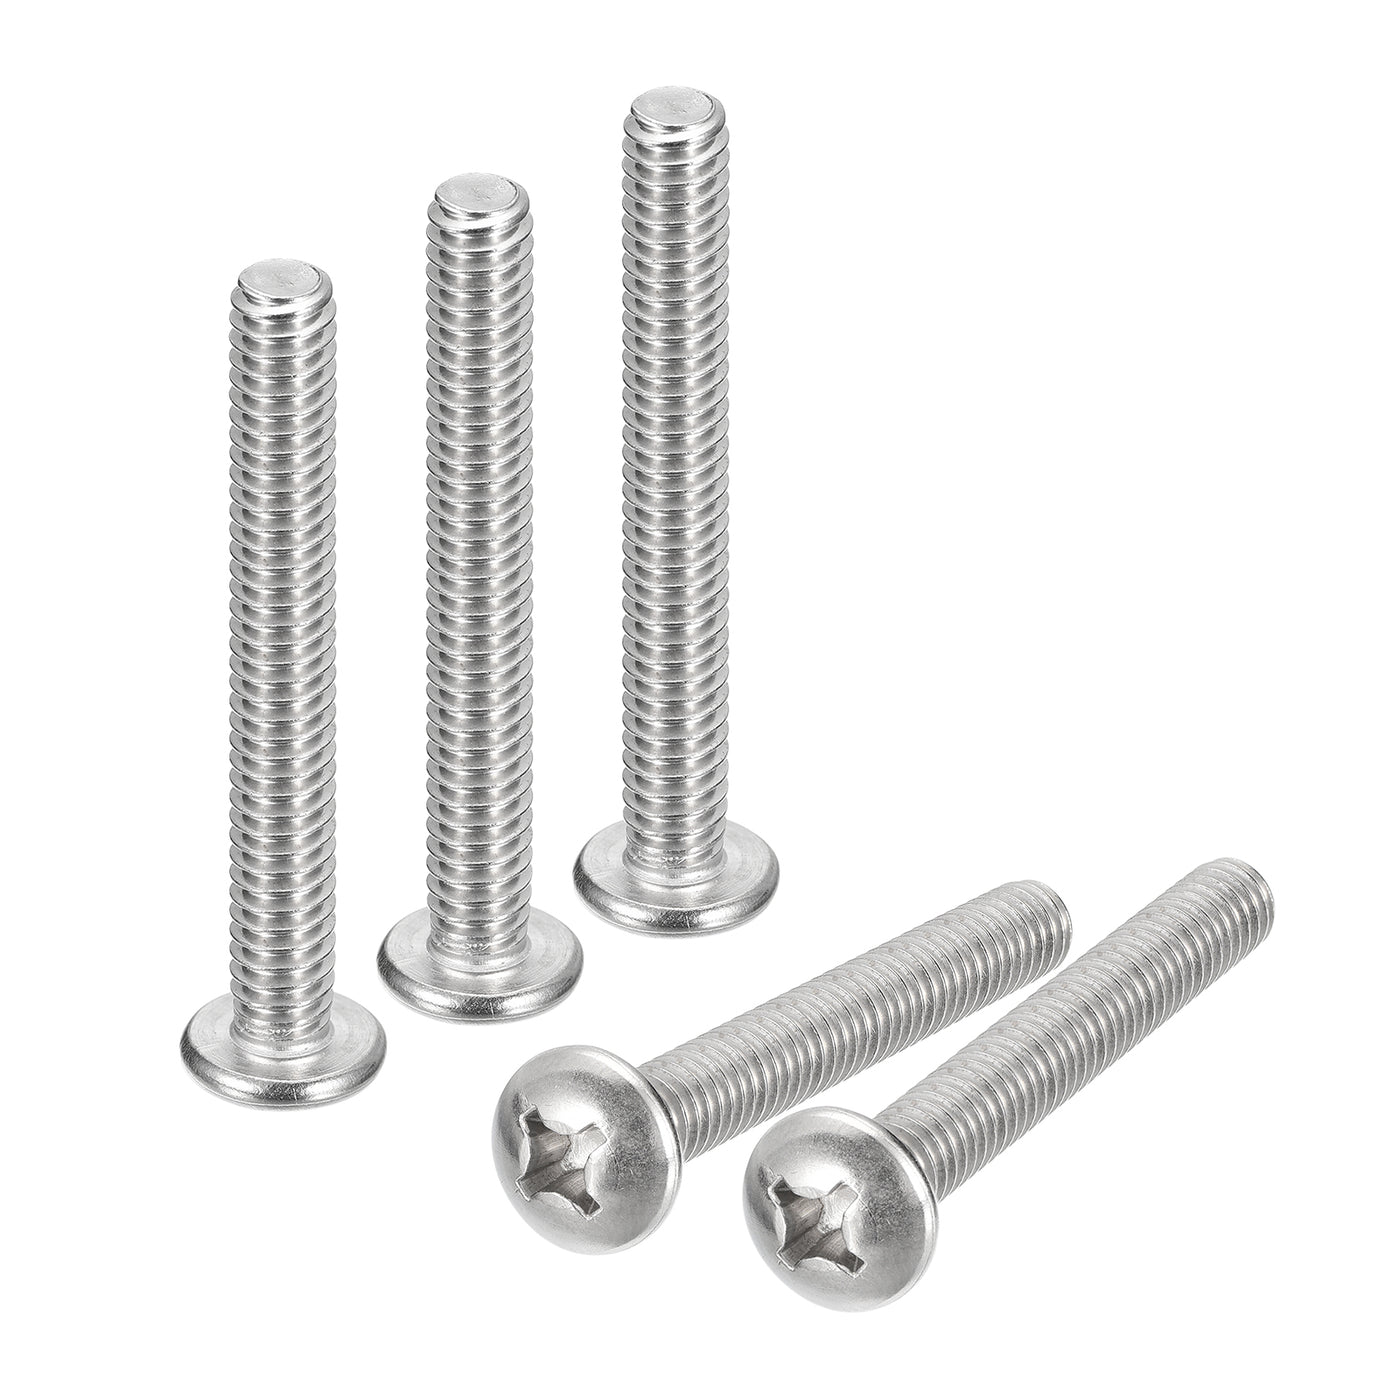 uxcell Uxcell 1/4-20x3" Pan Head Machine Screws, Stainless Steel 18-8 Screw, Pack of 10